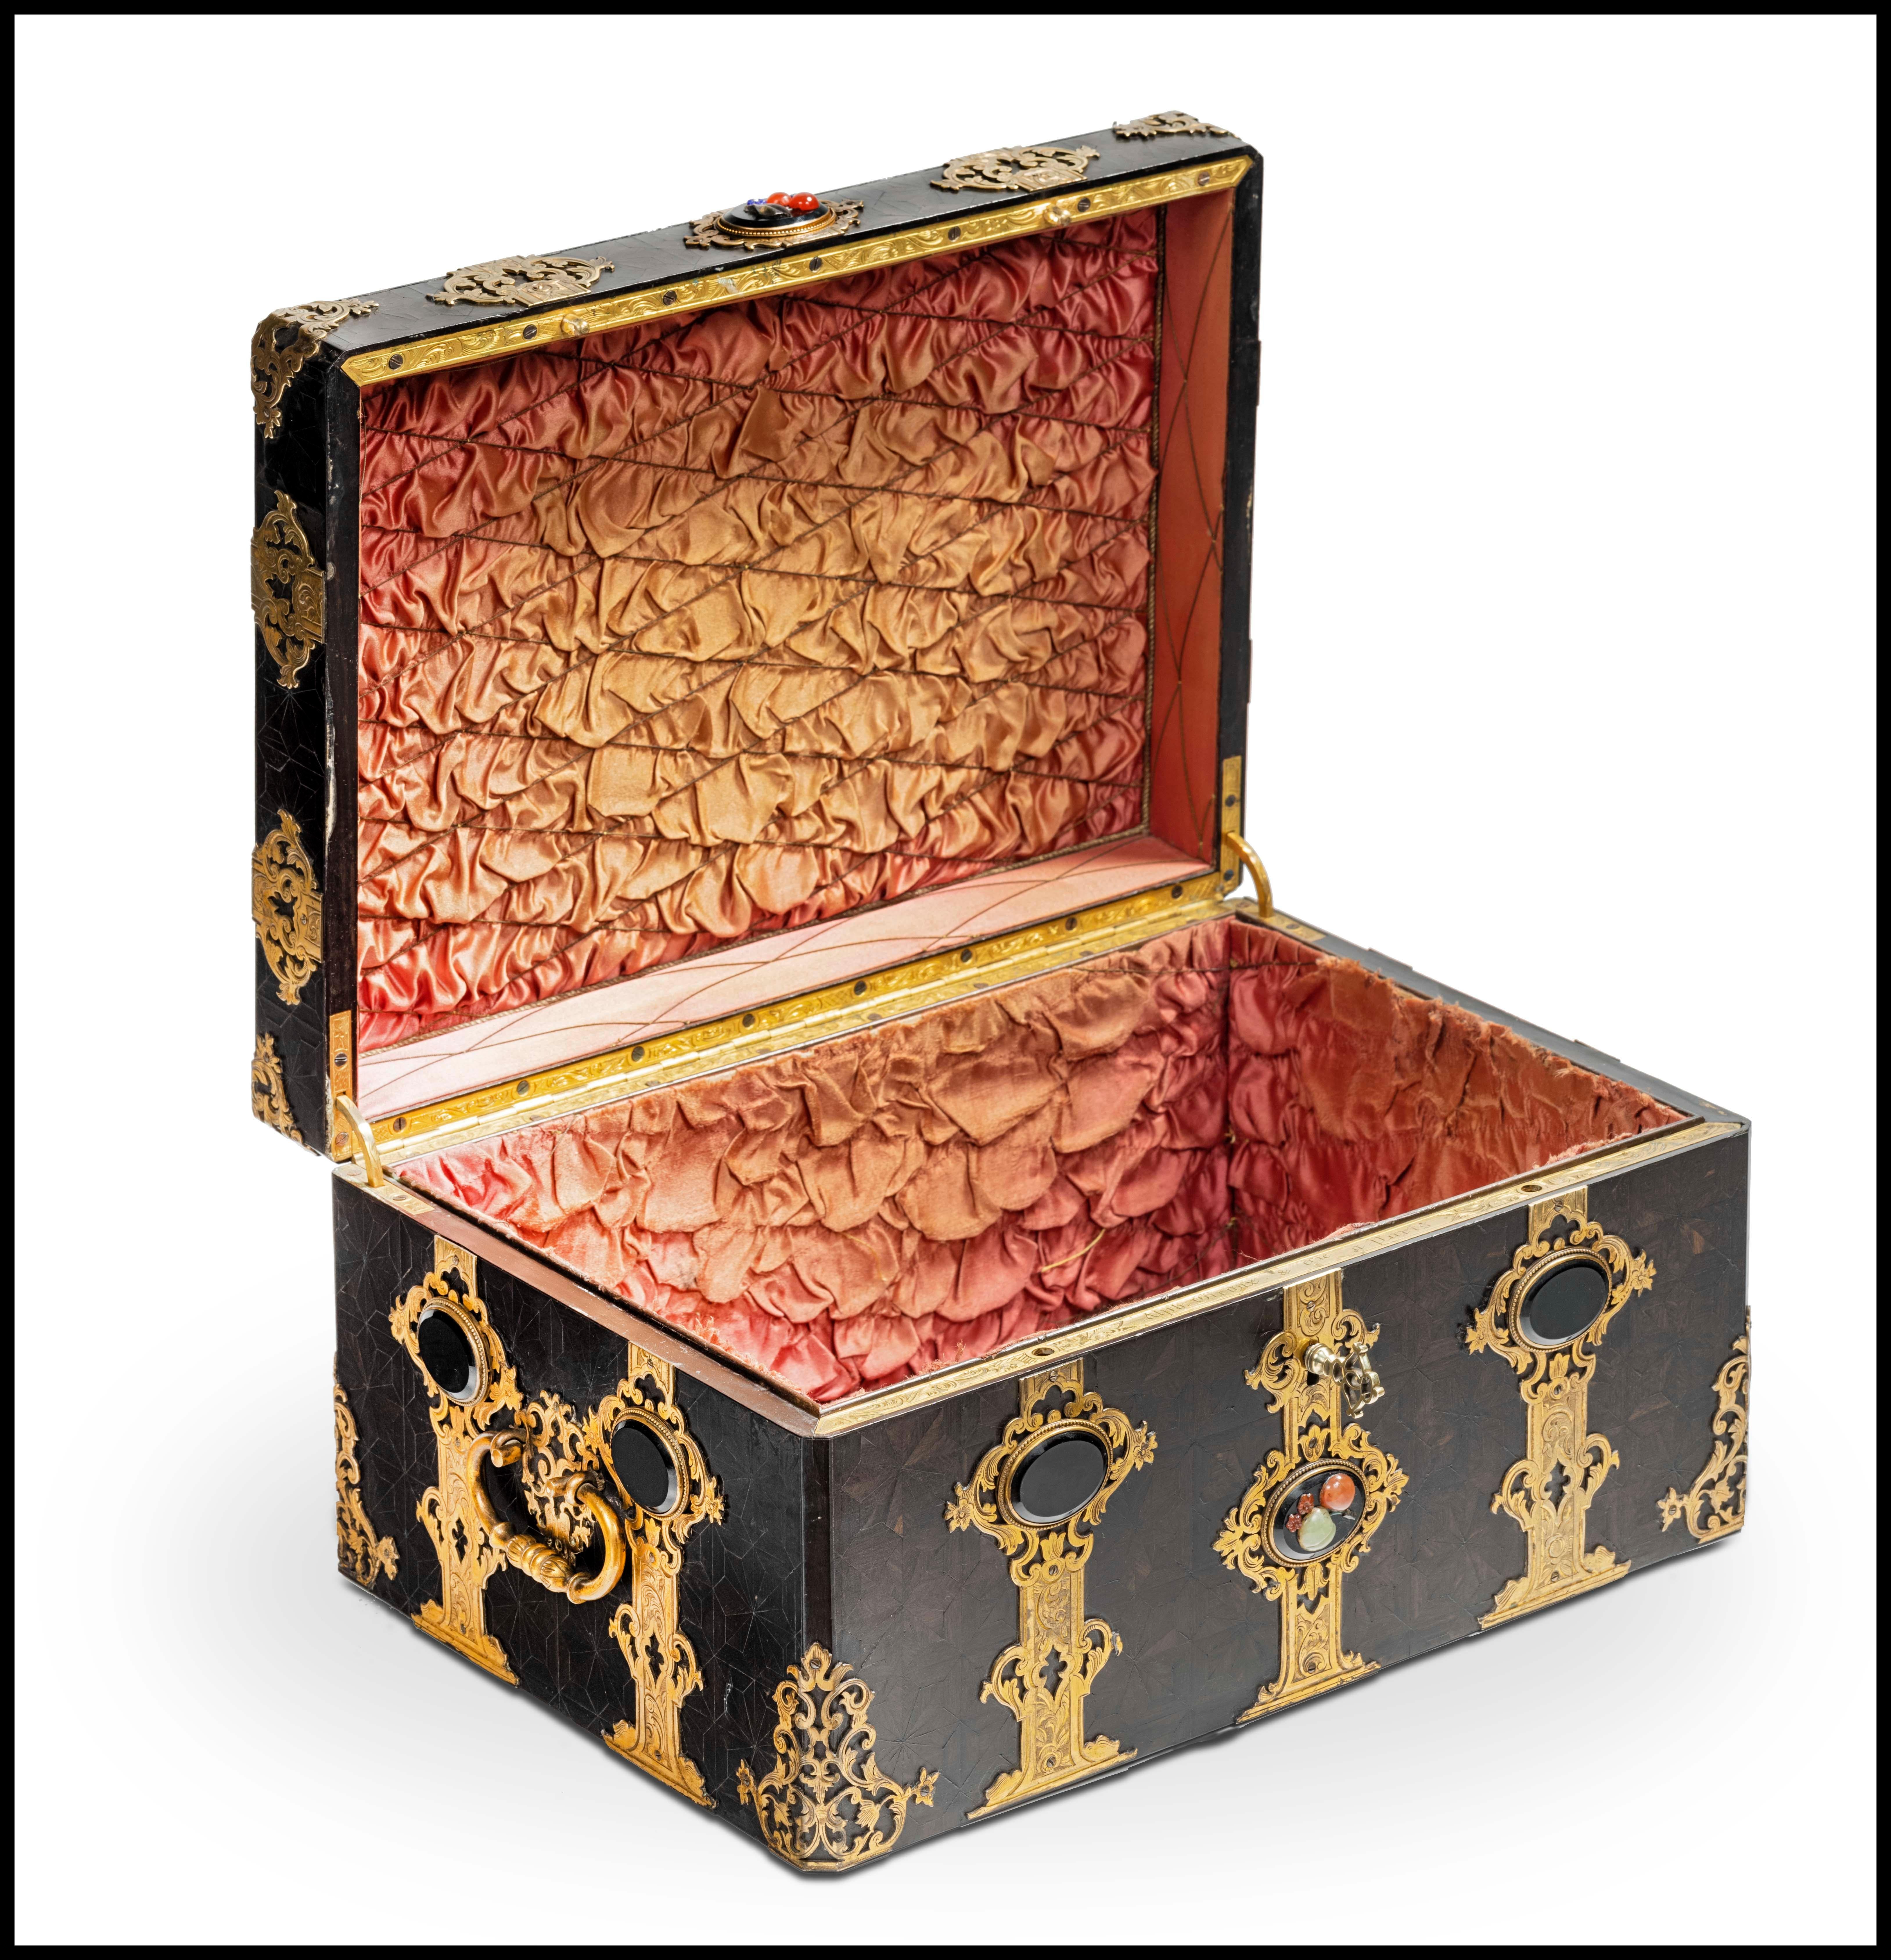 Rectangular box in ebony veneer inlaid with star patterns, all sides and the cover adorned with finely openwork and chiseled hinges in gilded bronze set with hard stone cabochons, side handles. 
Original key. Interior upholstered in silk.

First